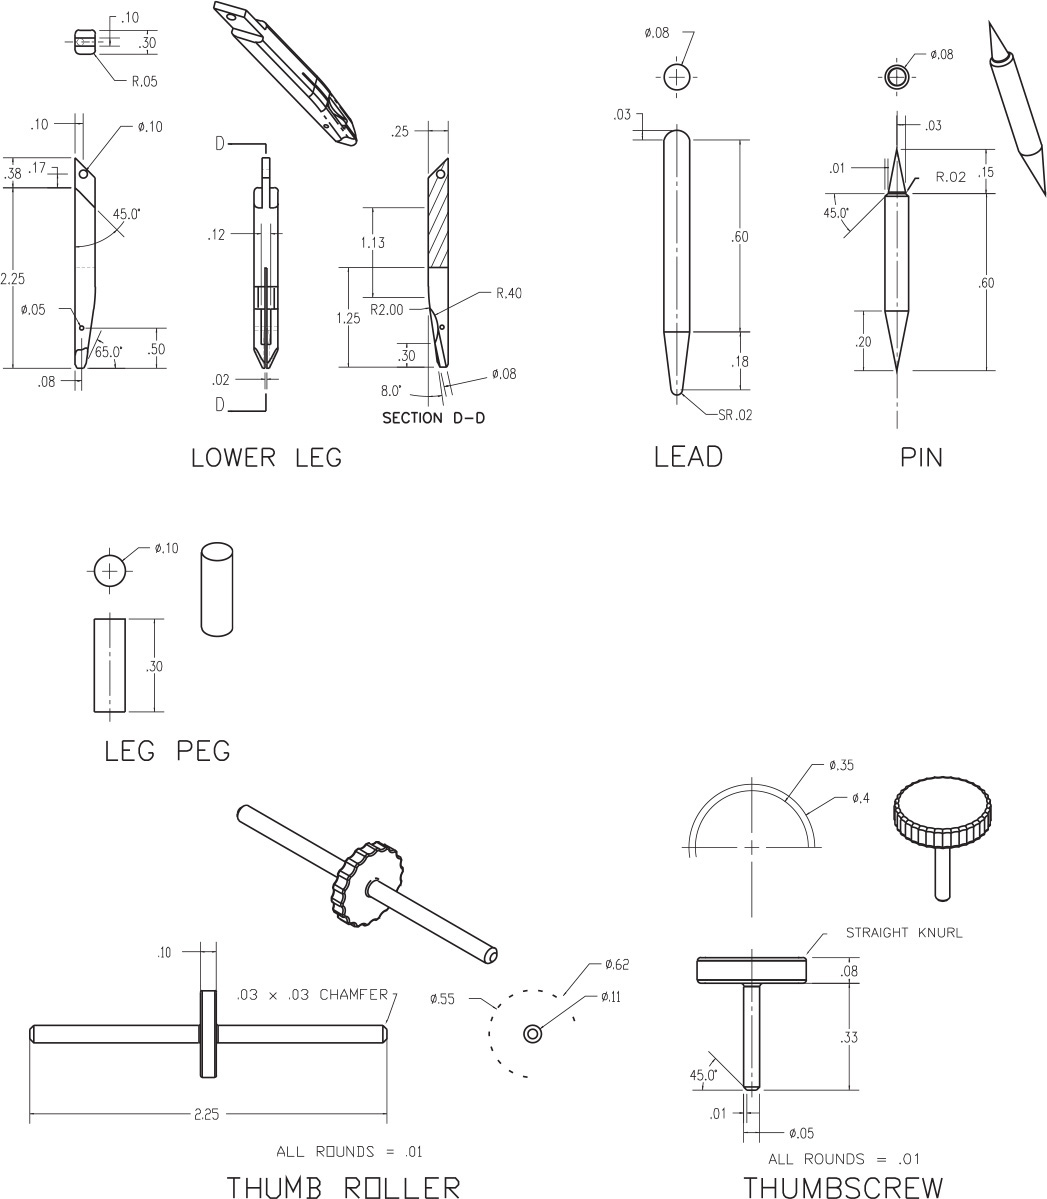 The frontal and top views of the following components of a compass are shown: lower leg, lead, pin, leg peg, thumb roller, and thumbscrew. Detailed measurements and markings are shown along with the views.